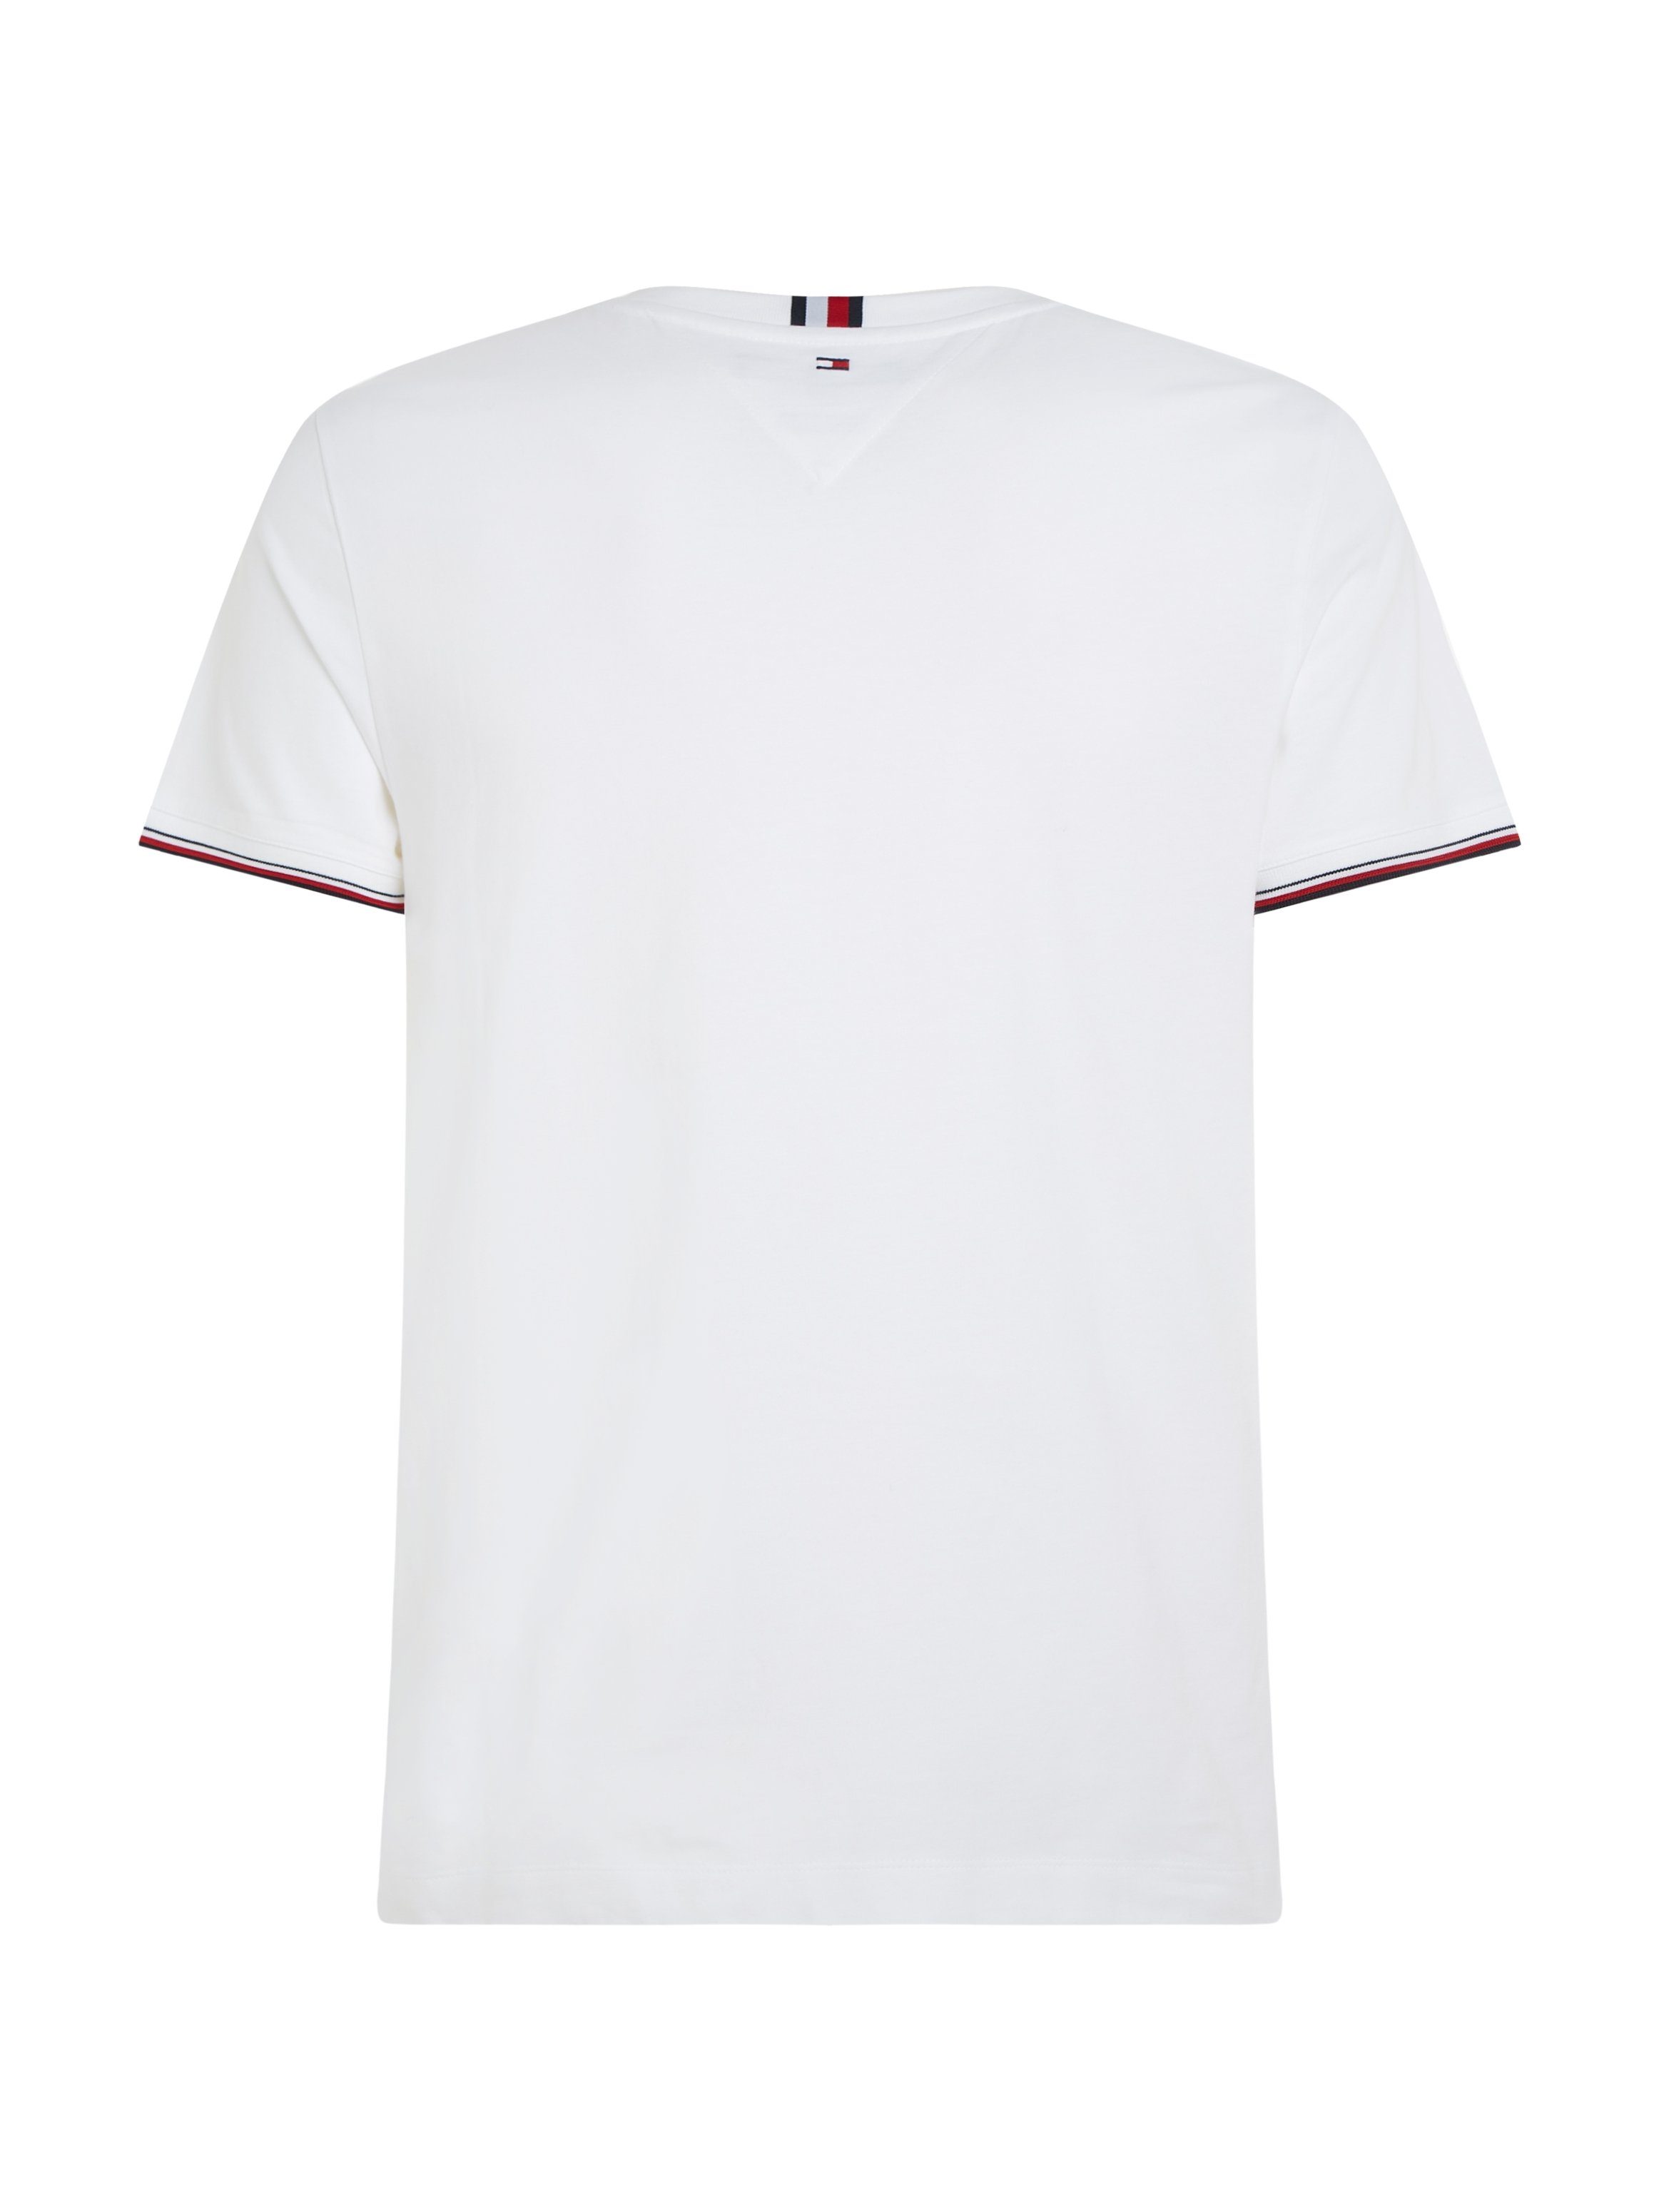 Tommy TEE Hilfiger White T-Shirt LOGO TIPPED TOMMY